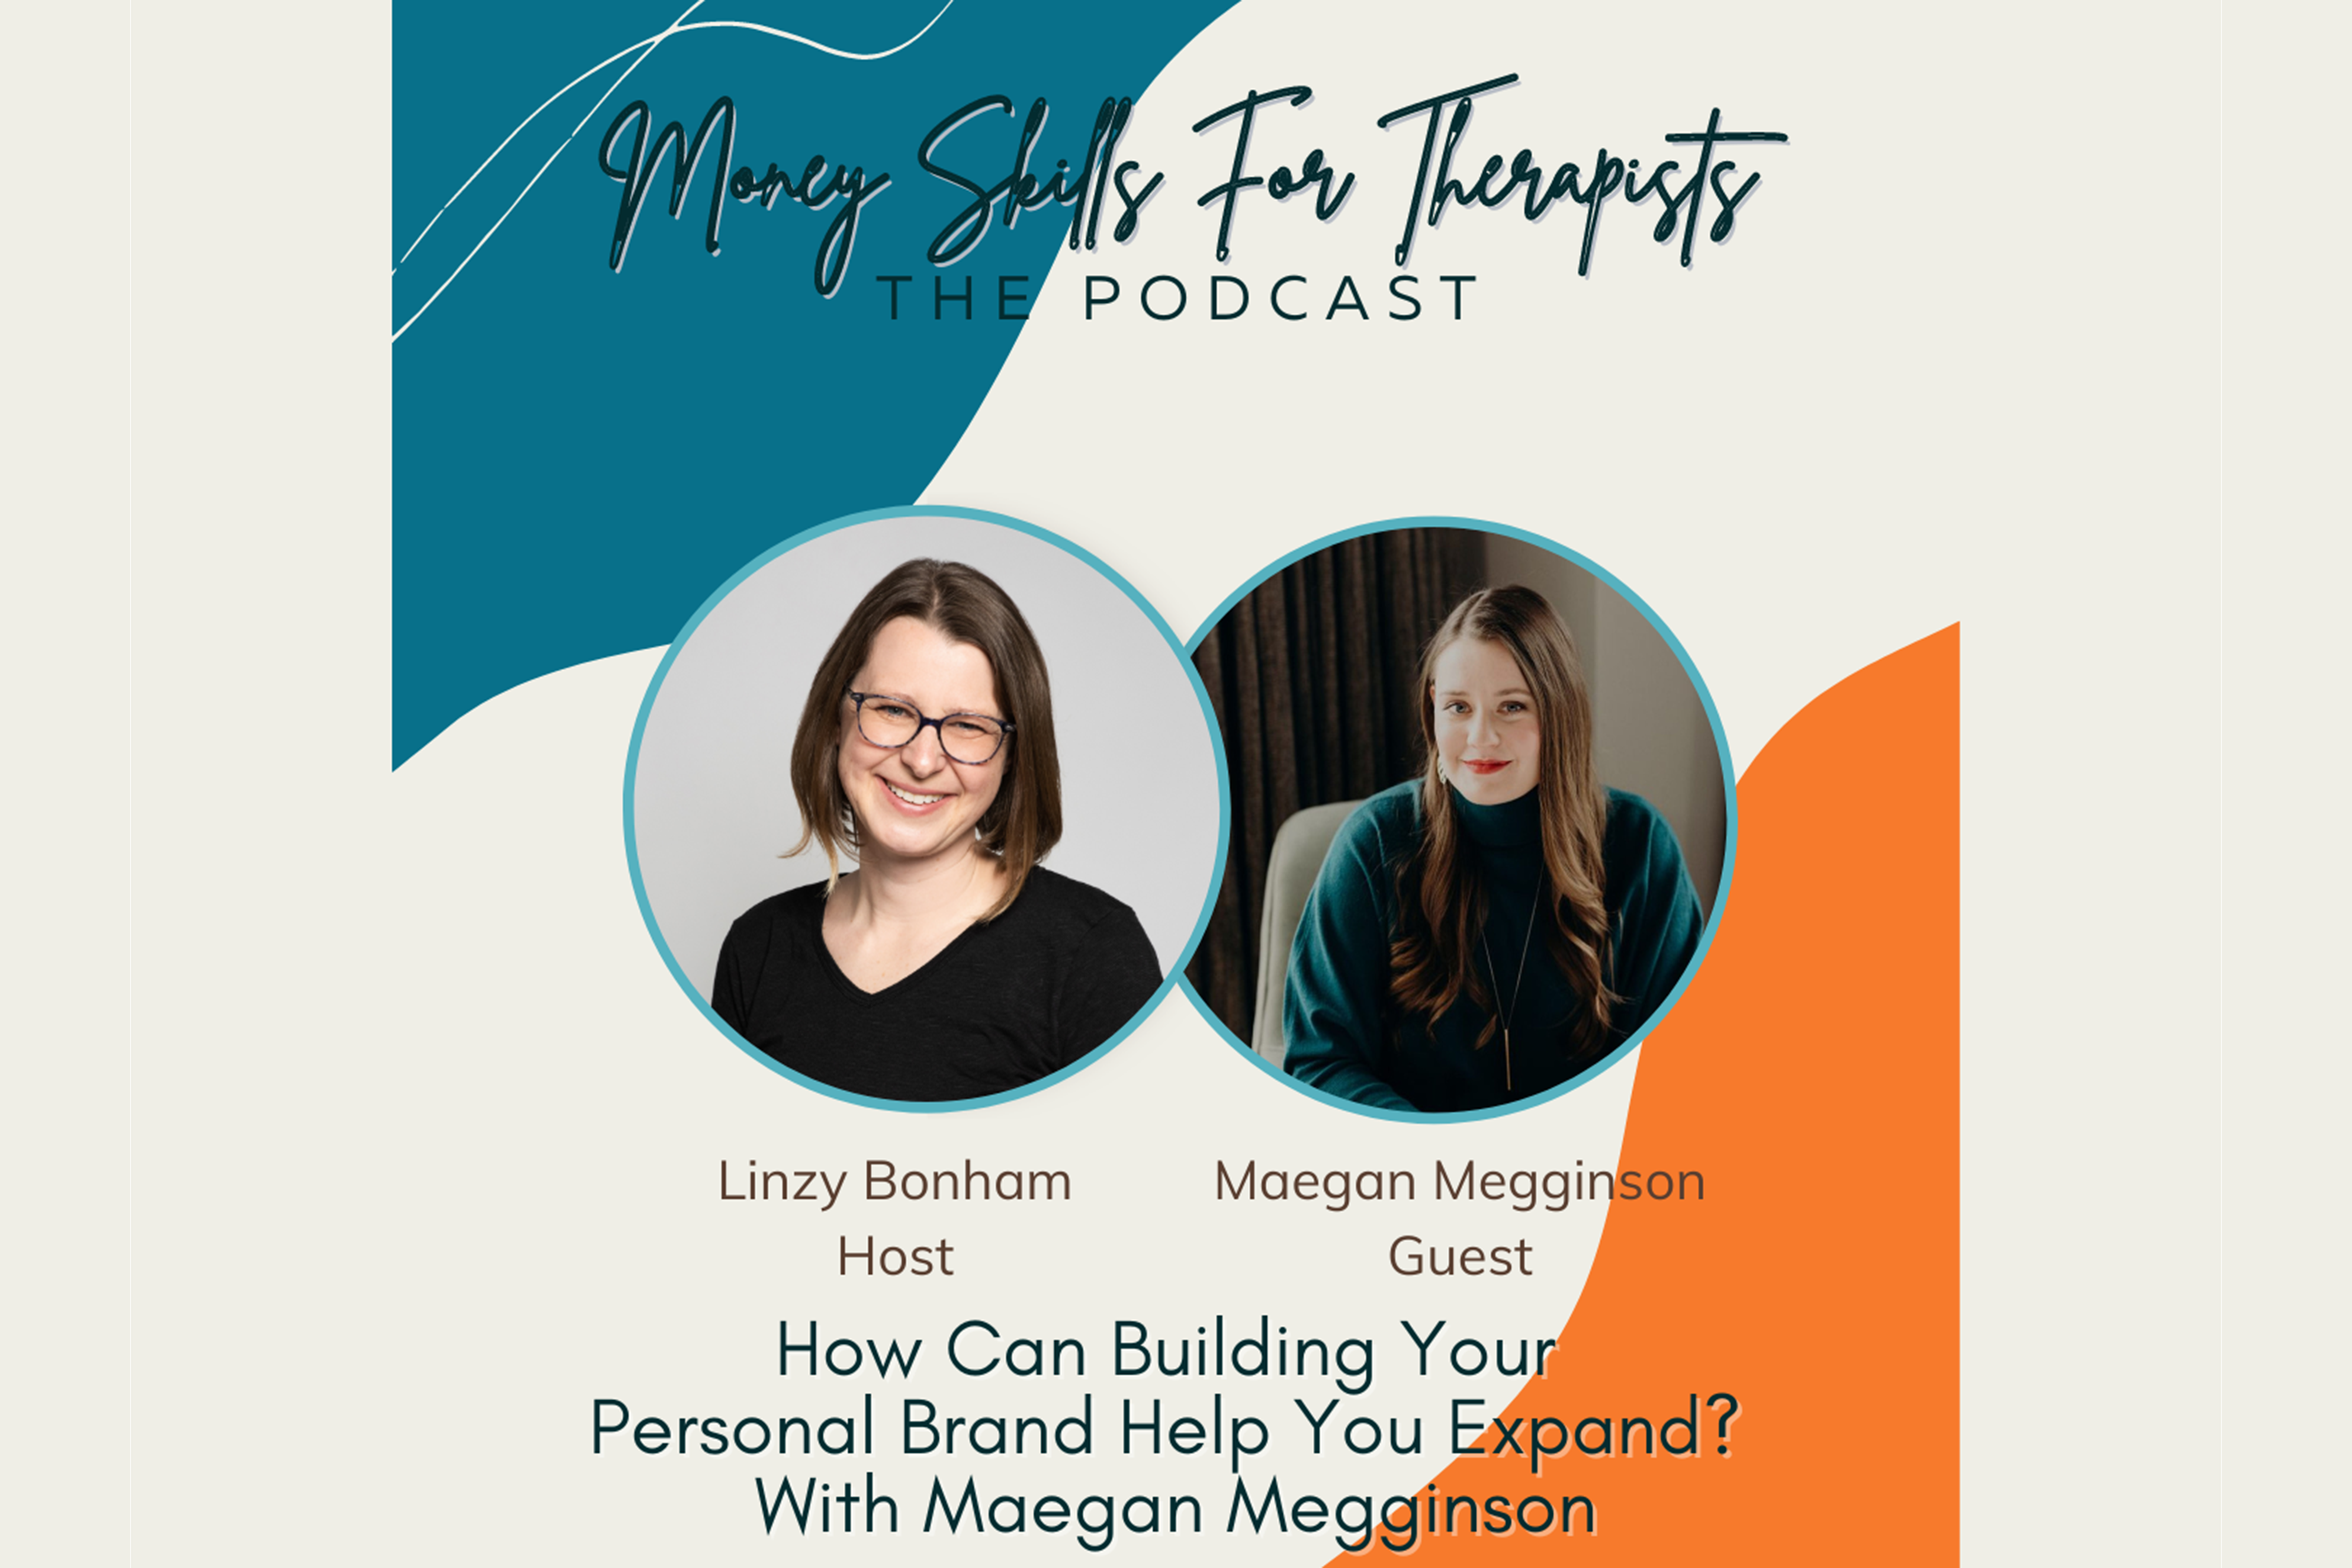 Image is a graphic for the Money Skills for Therapists podcast with Linzy Bonham and features a headshot of Linzy, a white woman with shoulder length blonde hair and glasses, and Maegan, a white woman with long brown hair.